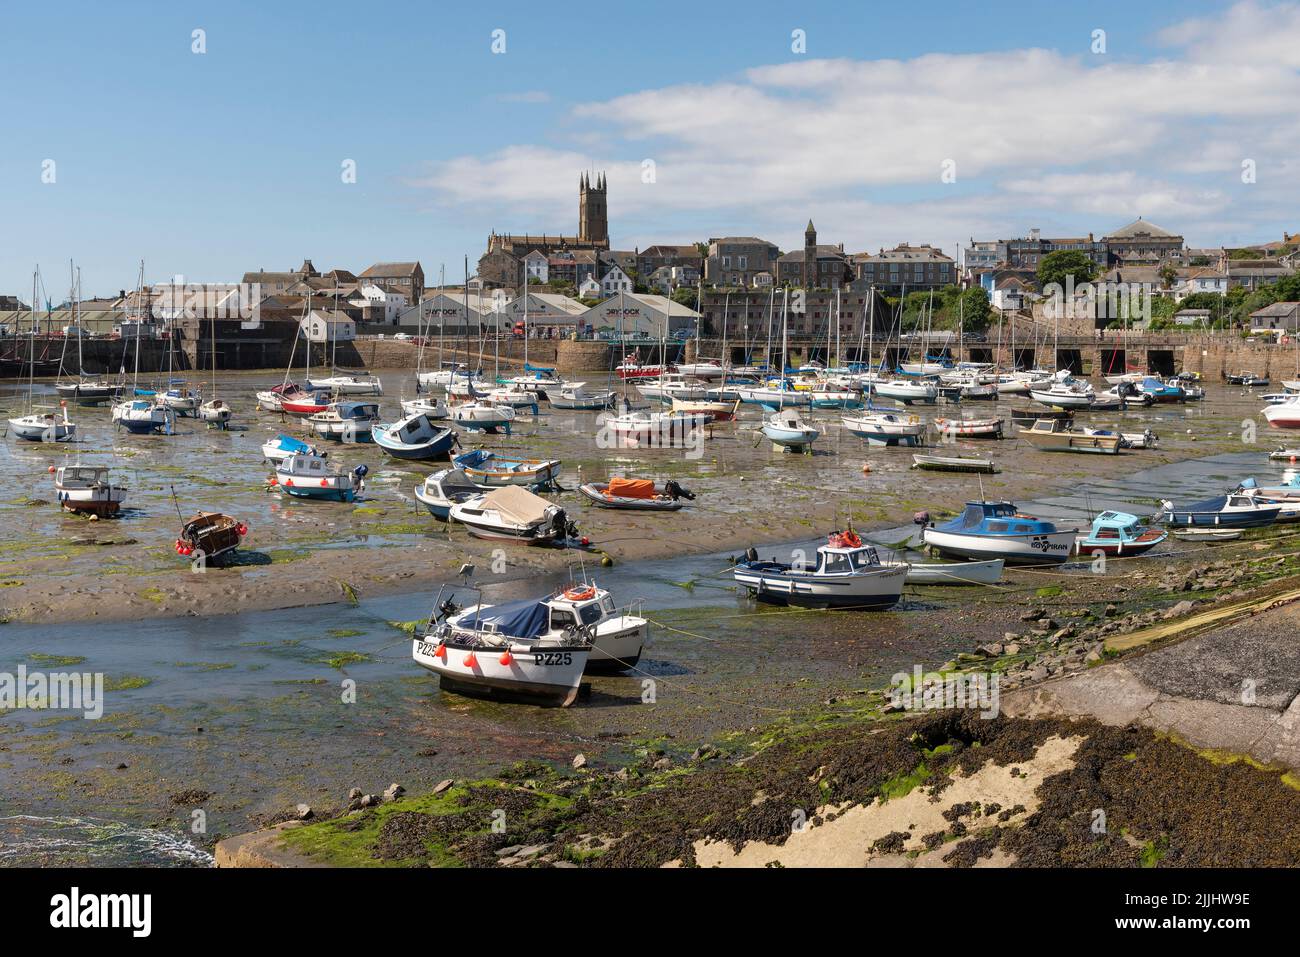 Penzance, Cornwall, England, UK. 2022. Penzance Harbour with boats settled on the mud with a backdrop of the town centre. Cornwall UK. Stock Photo